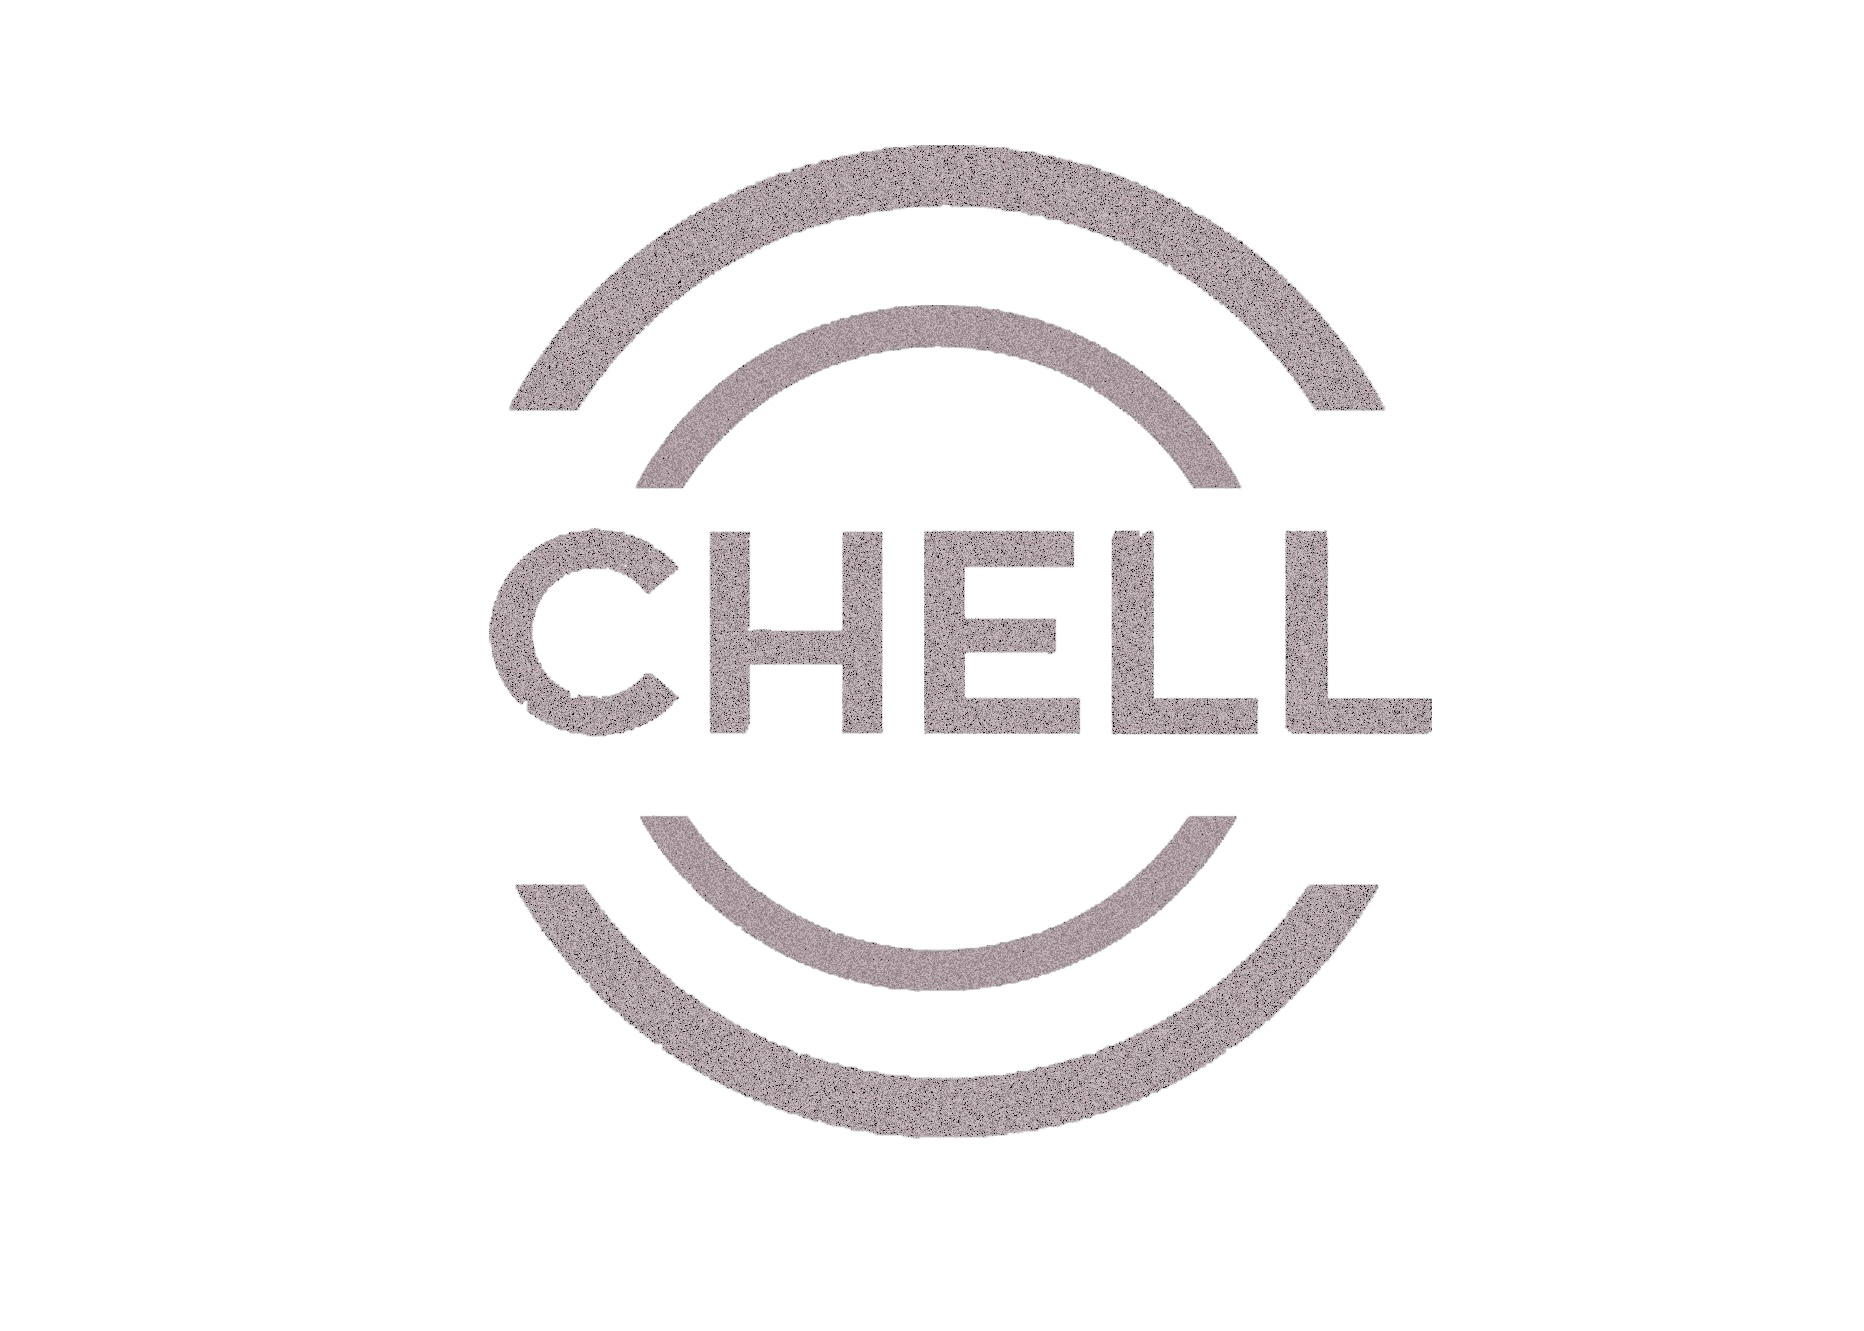 Chellproduction